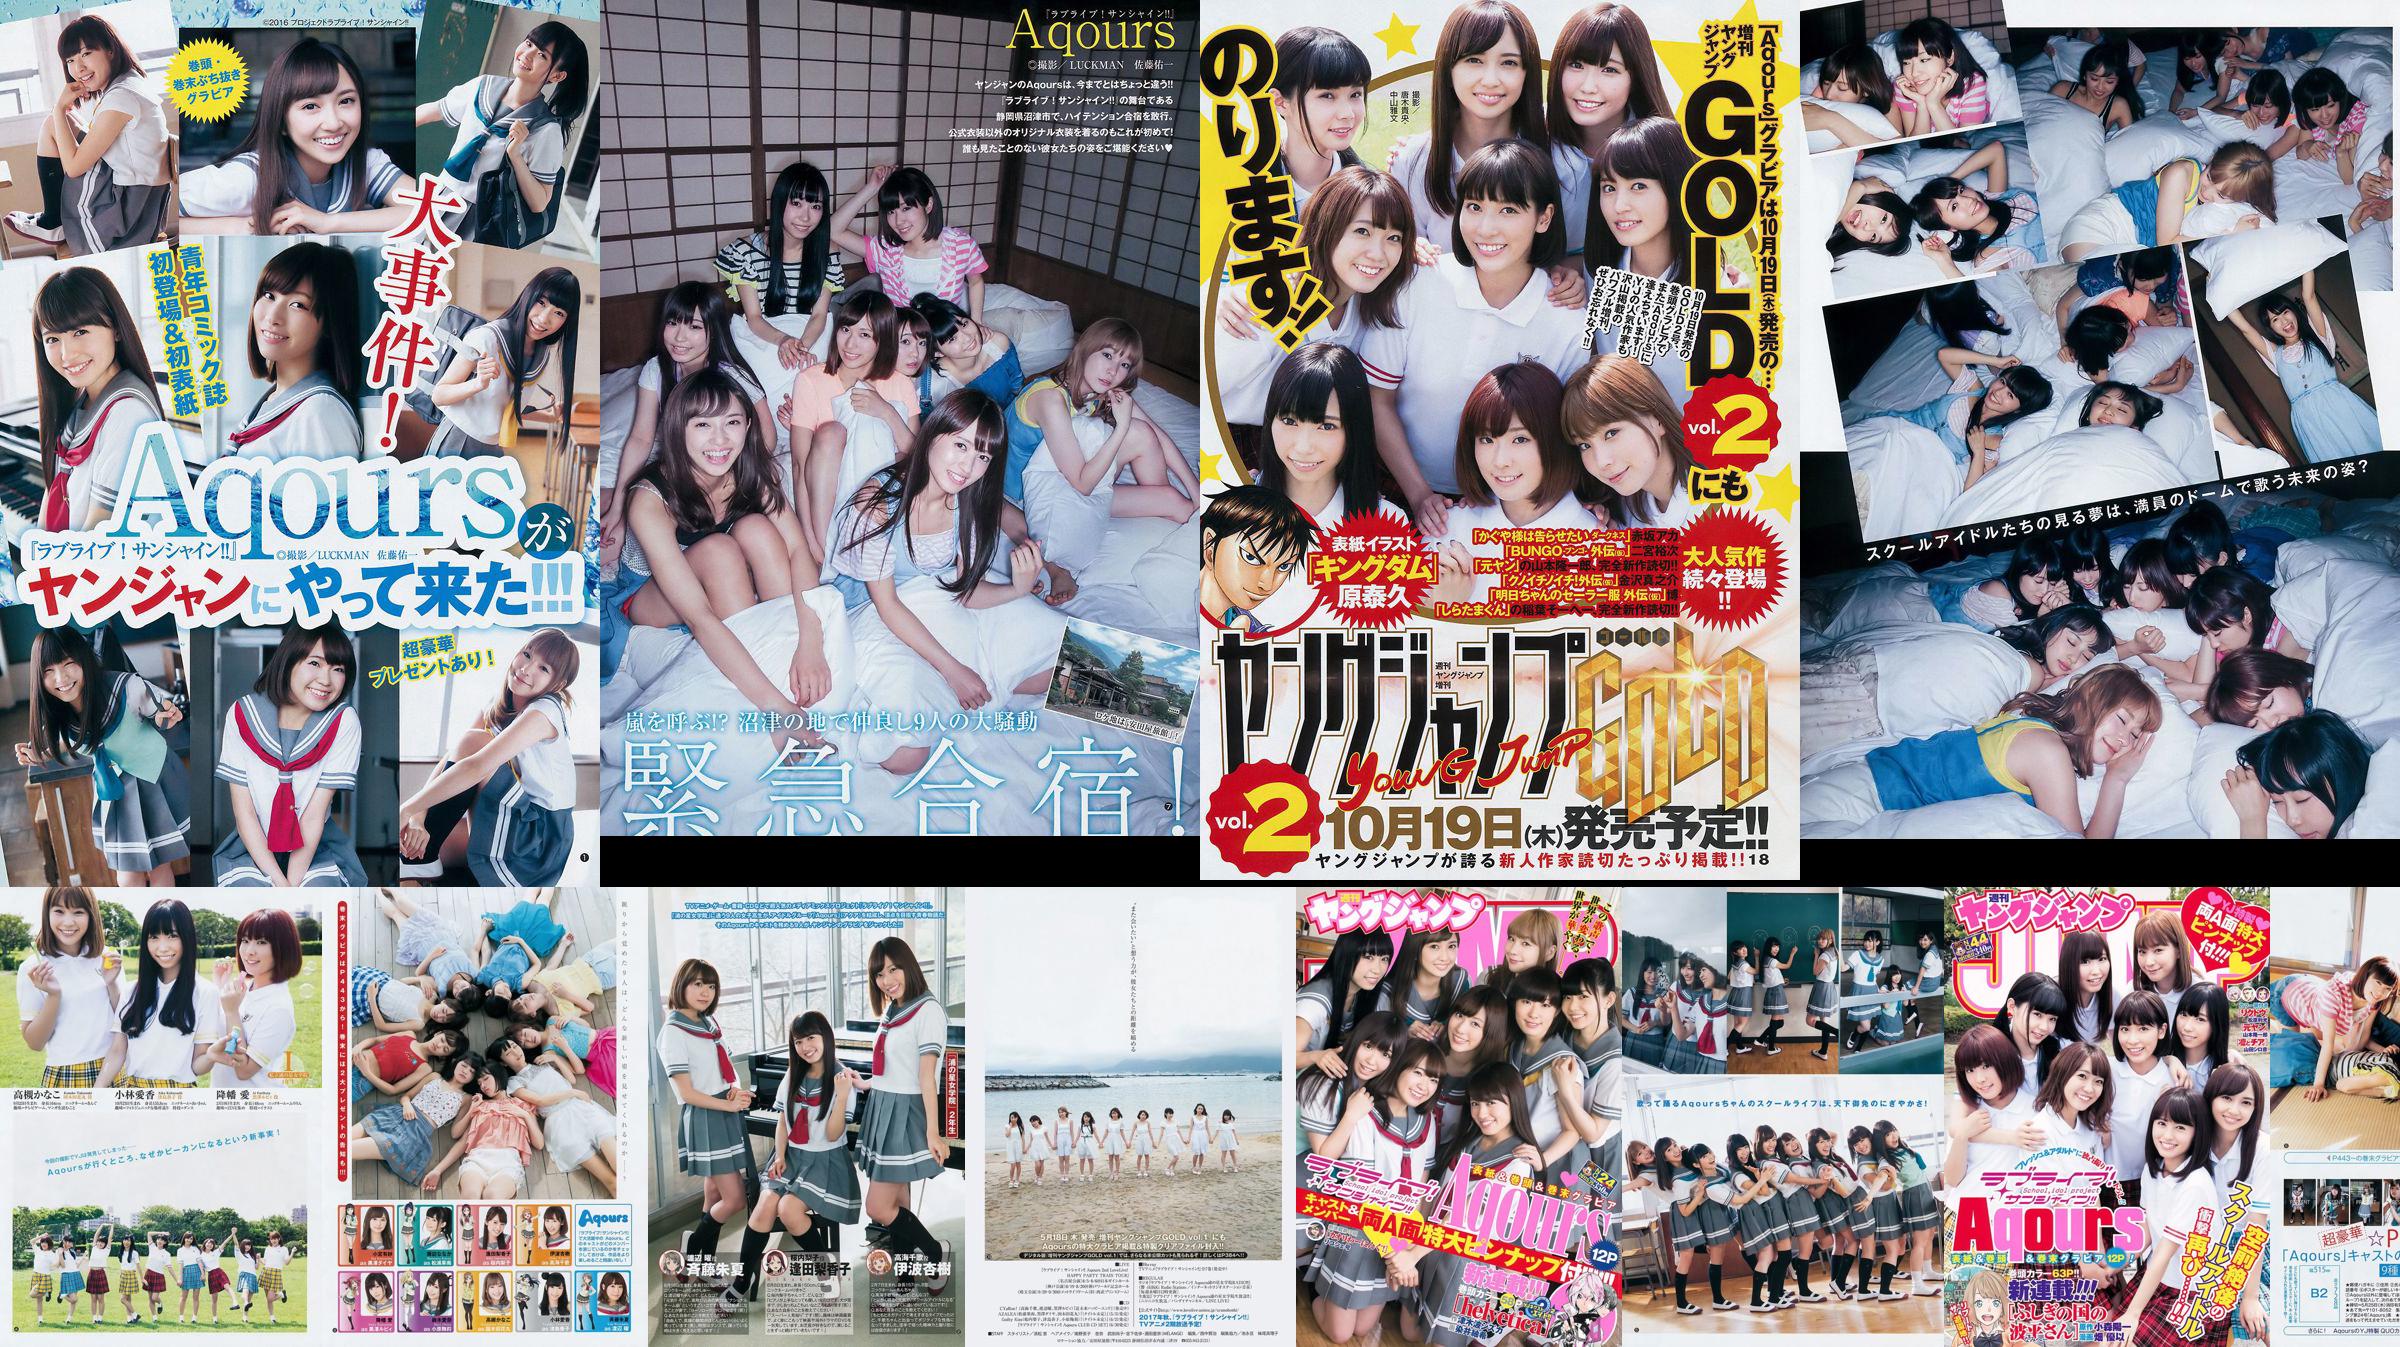 Japan Combination Aqours [Weekly Young Jump] 2017 No.44 Photo Magazine No.136a93 หน้า 4